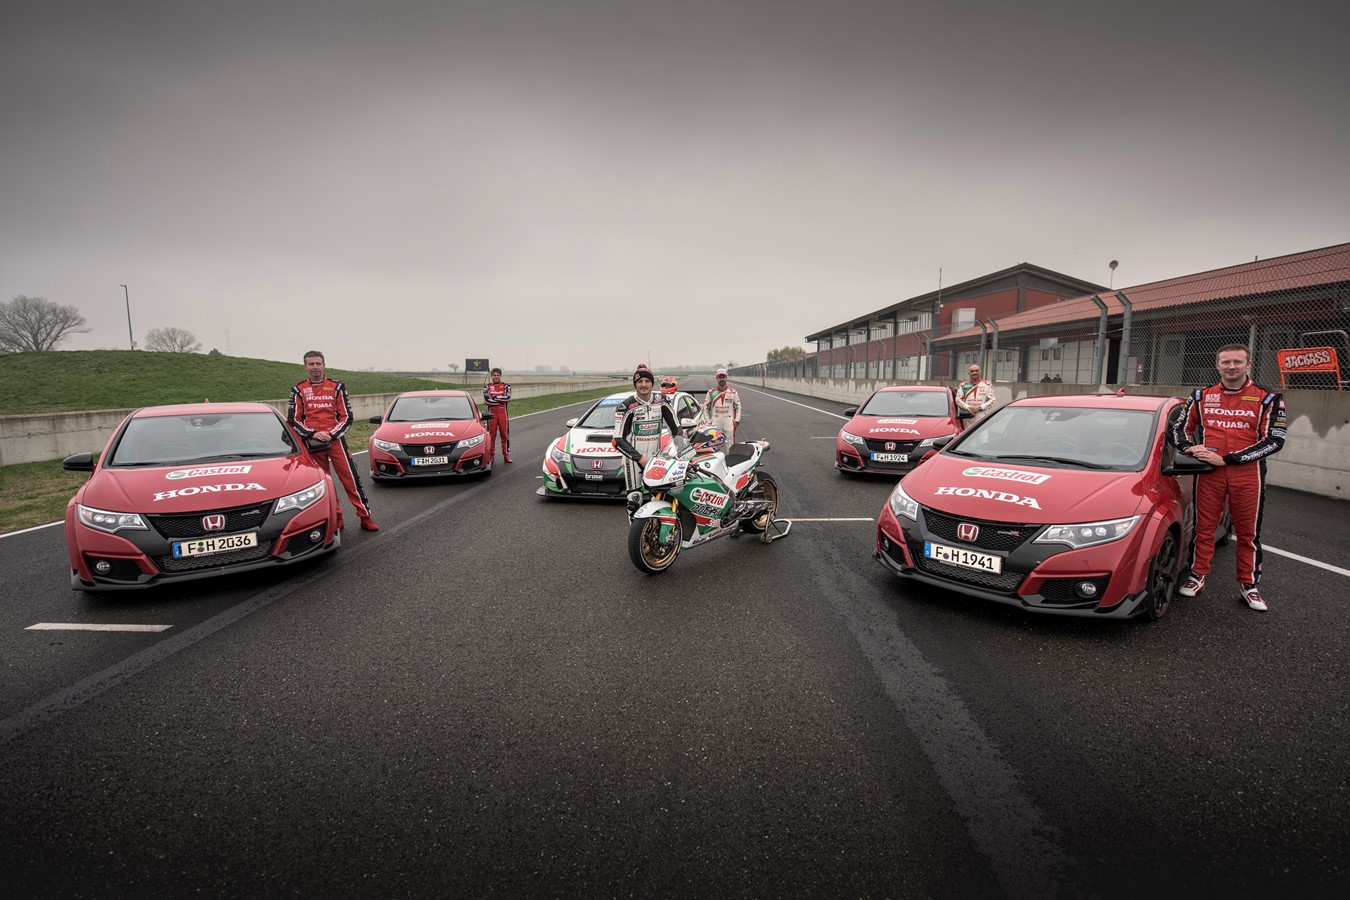 Honda demonstrates Civic Type R’s race pedigree in a celebration of two and four wheels